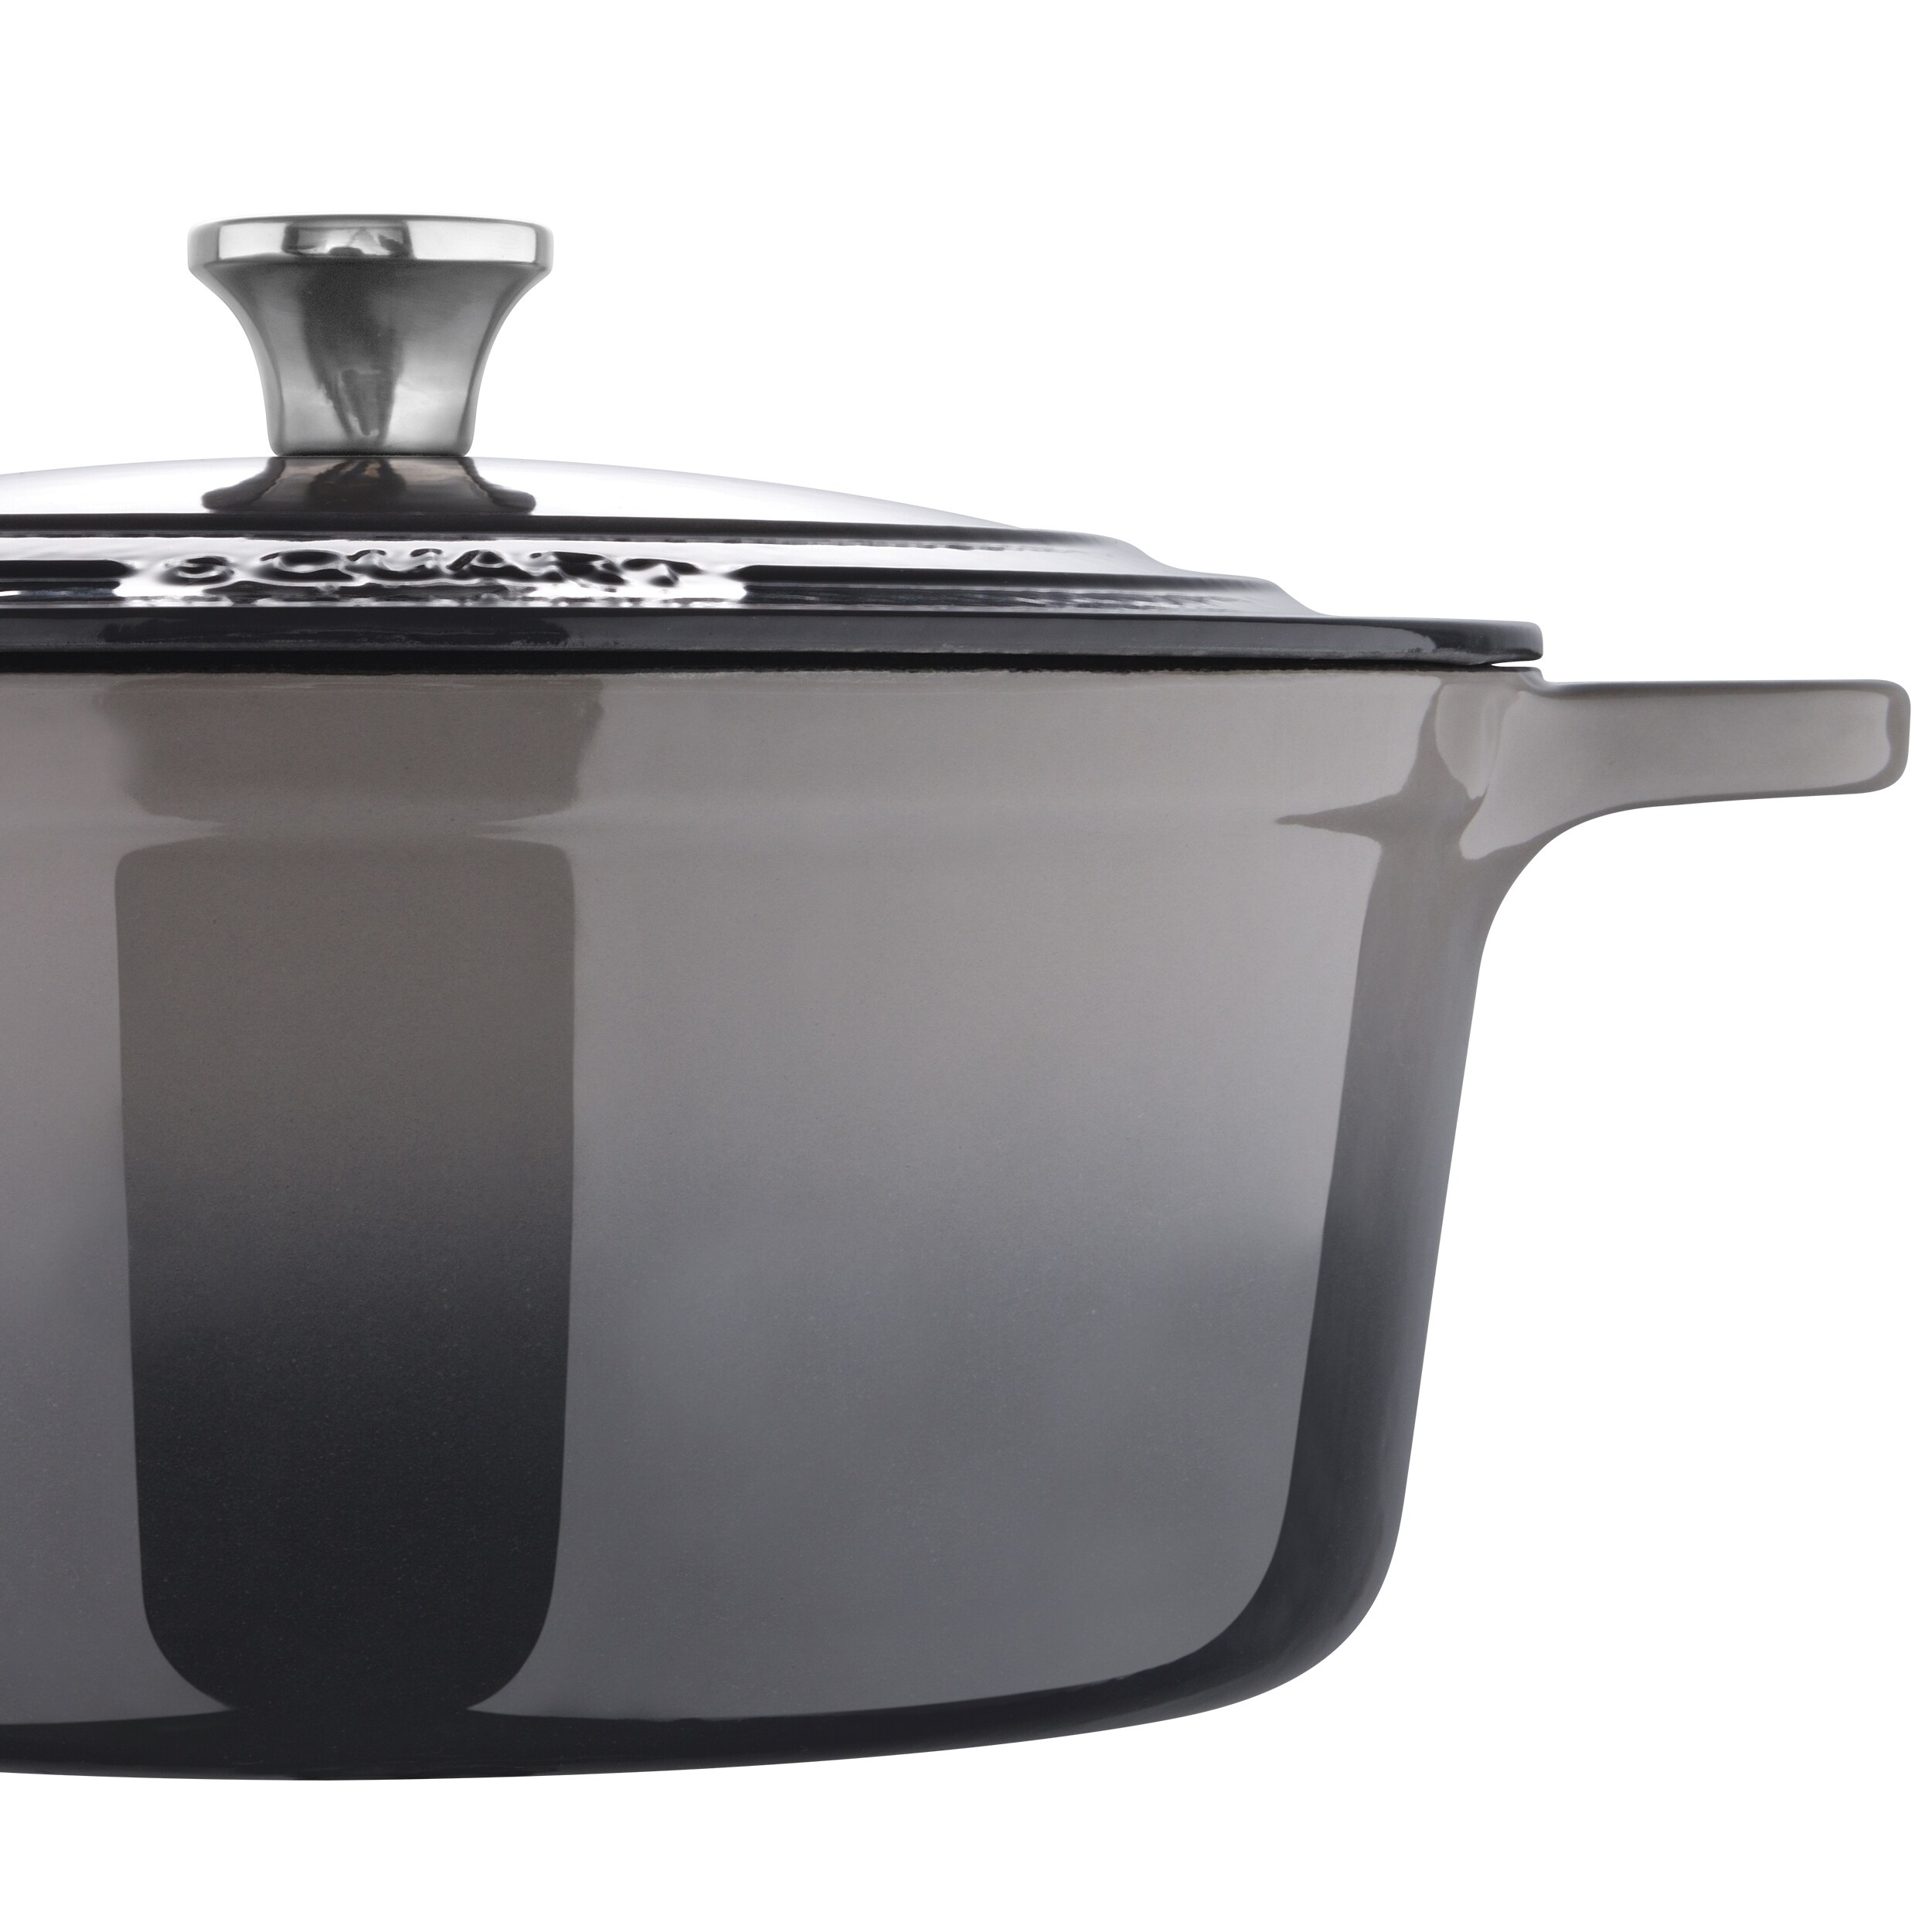 https://ak1.ostkcdn.com/images/products/is/images/direct/f9dcfb4c3ef583e50abe6bcd7588ba0479208b9c/Bergner-MPUS16321BLU-6-Quart-Dutch-Oven-with-Lid.jpg